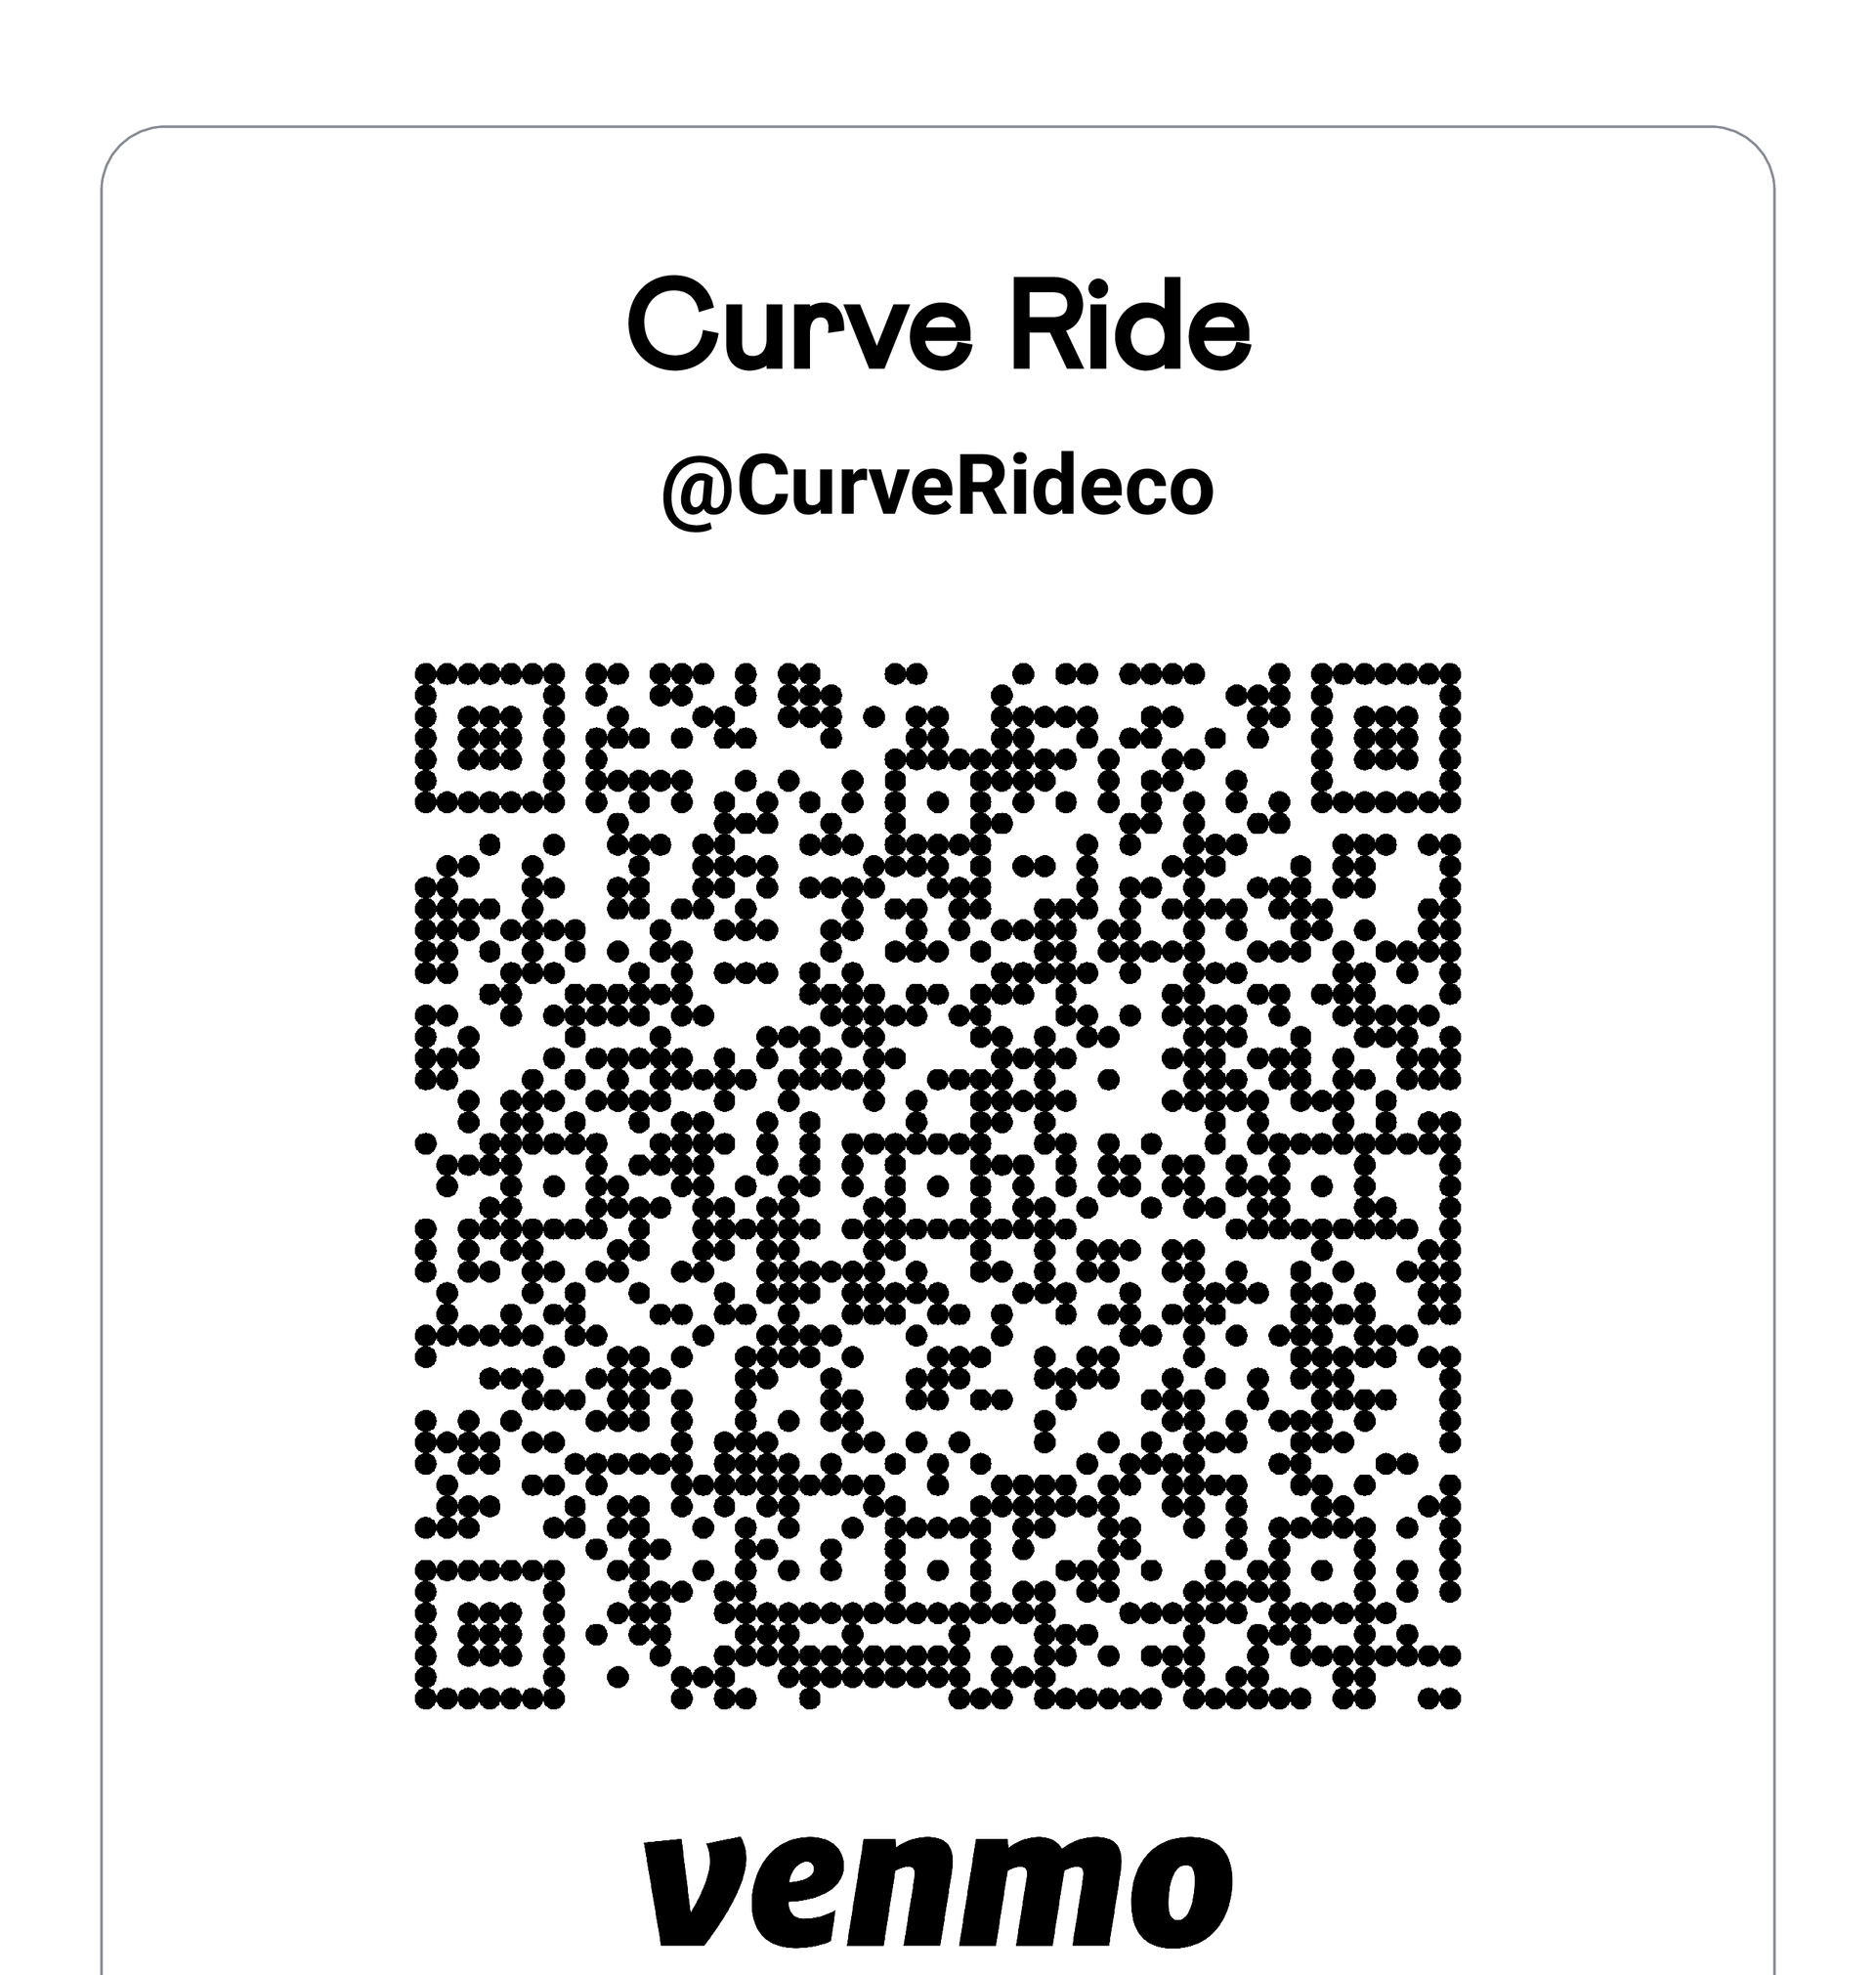 A qr code for curve ride is on a white background.